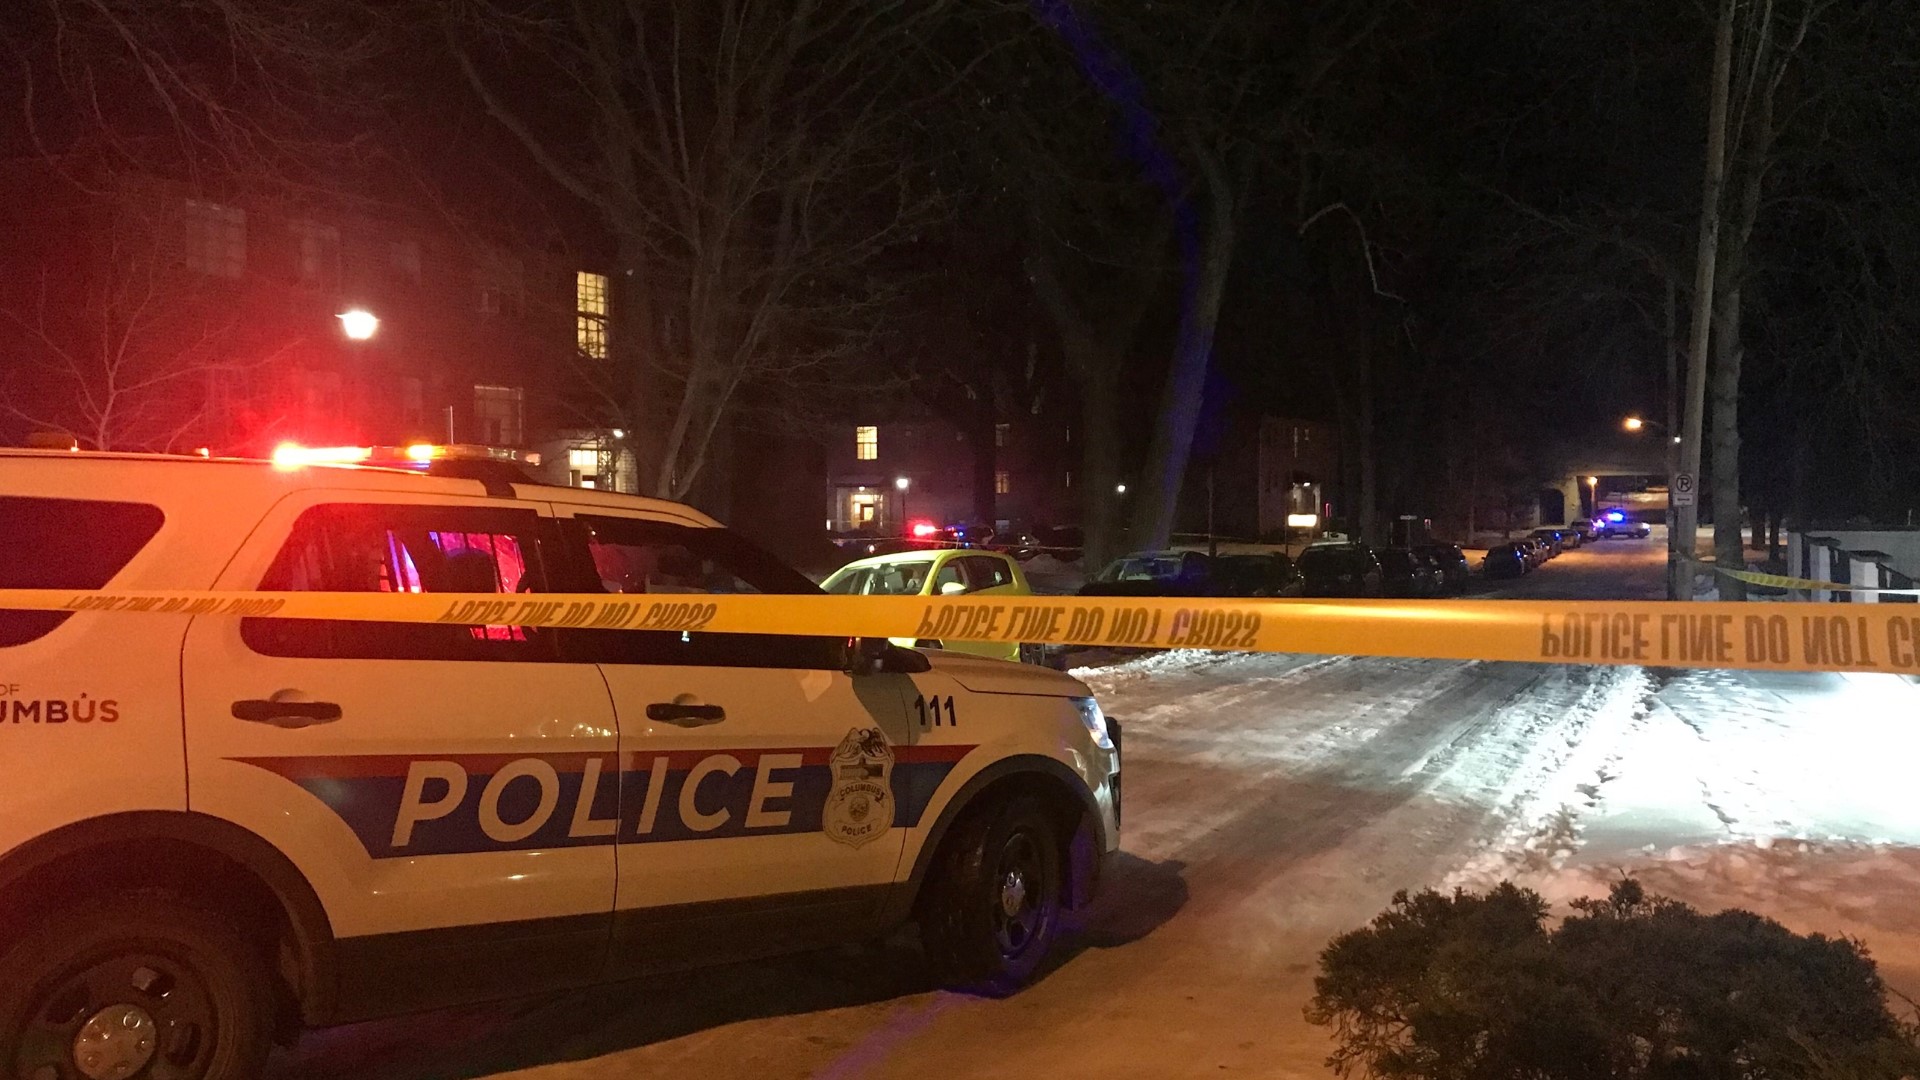 Police said the shooting happened in the 100 block of Clifton Court around 11 p.m. on Tuesday.